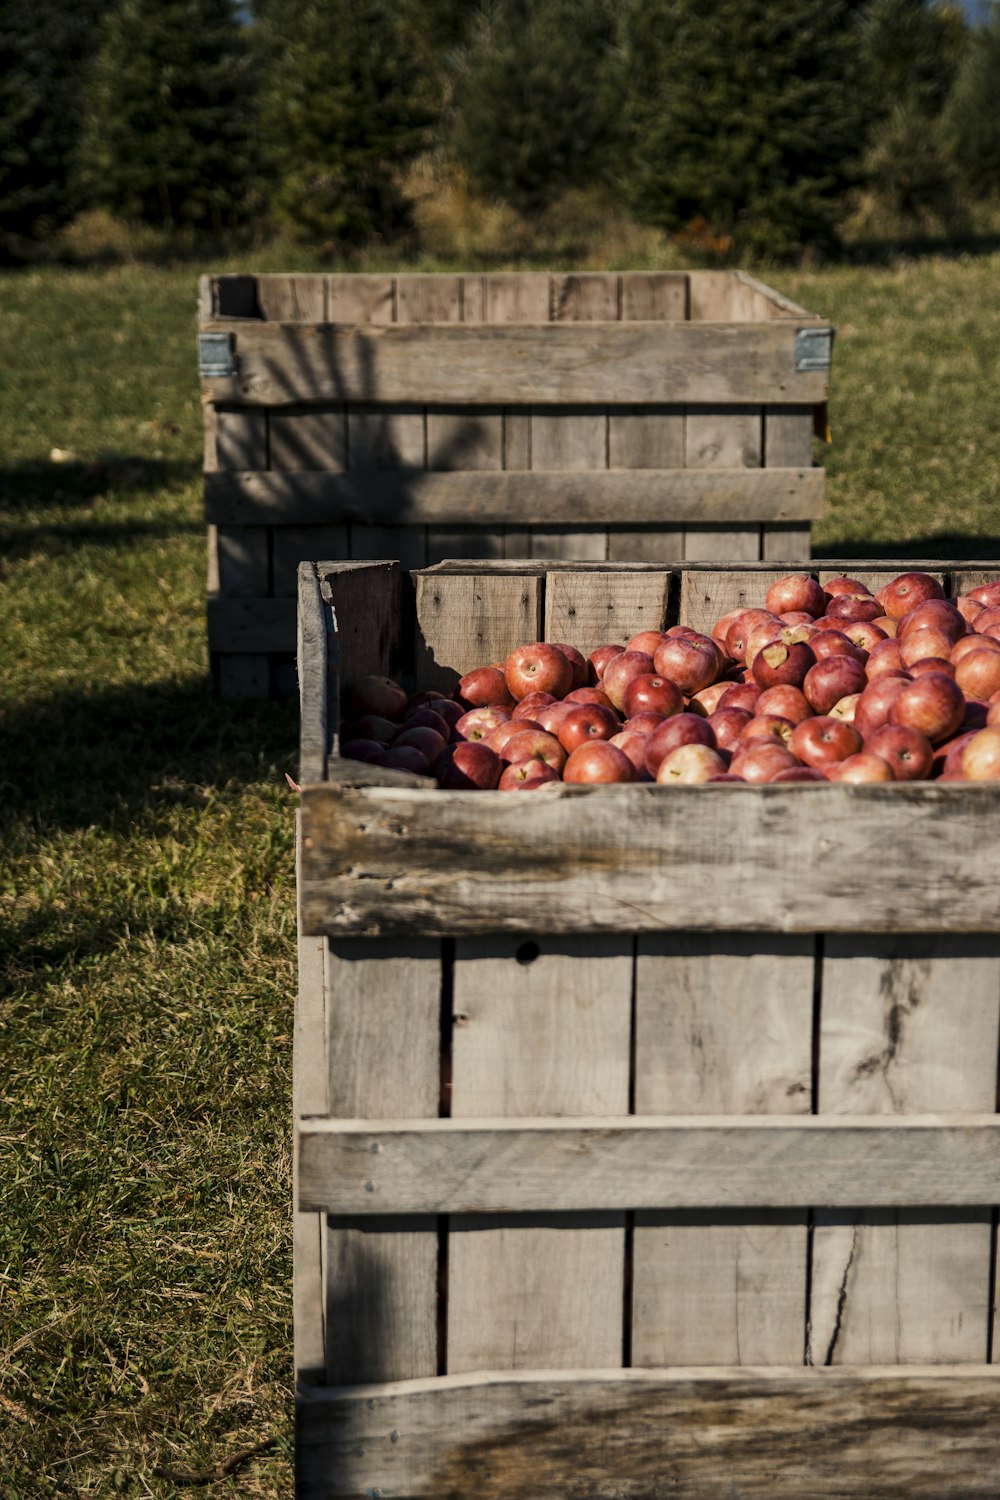 red apples on brown wooden crate